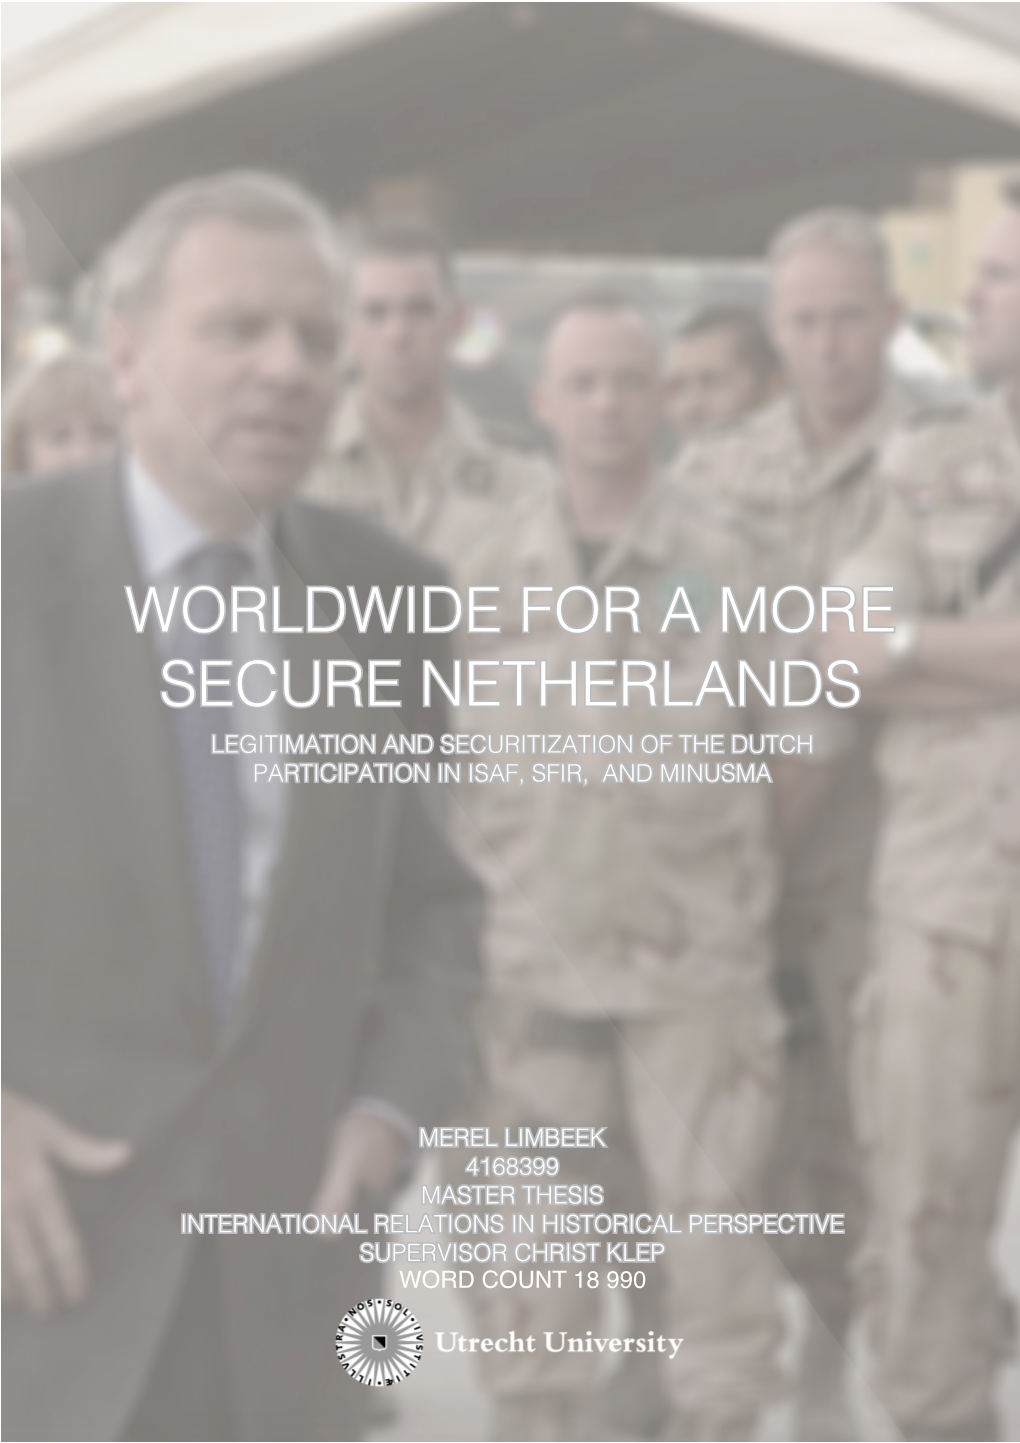 Worldwide for a More Secure Netherlands Legitimation and Securitization of the Dutch Participation in Isaf, Sfir, and Minusma